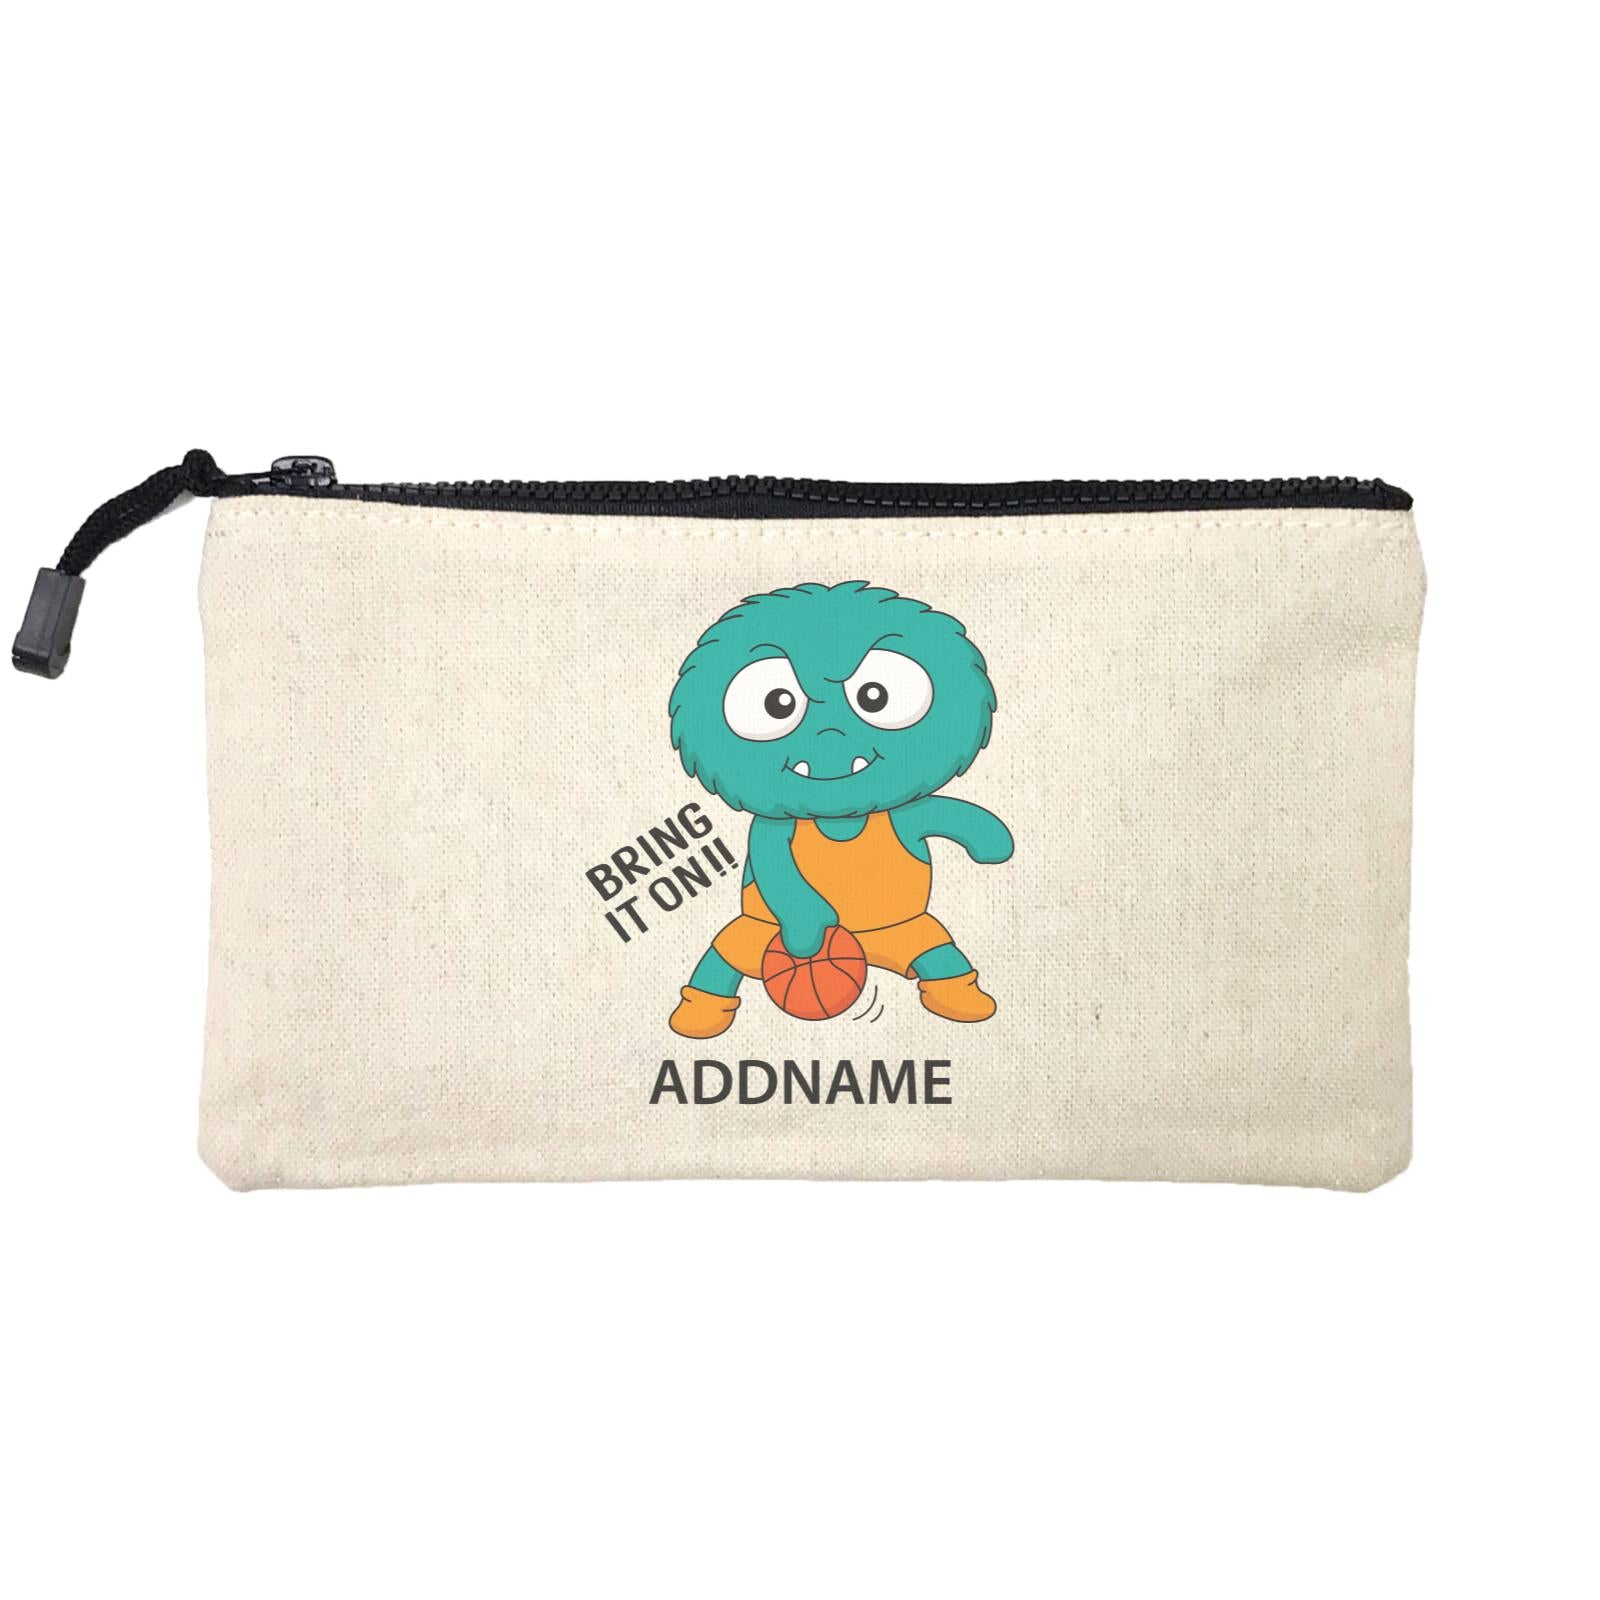 Cool Cute Monster Bring It On Basketball Monster Addname Mini Accessories Stationery Pouch